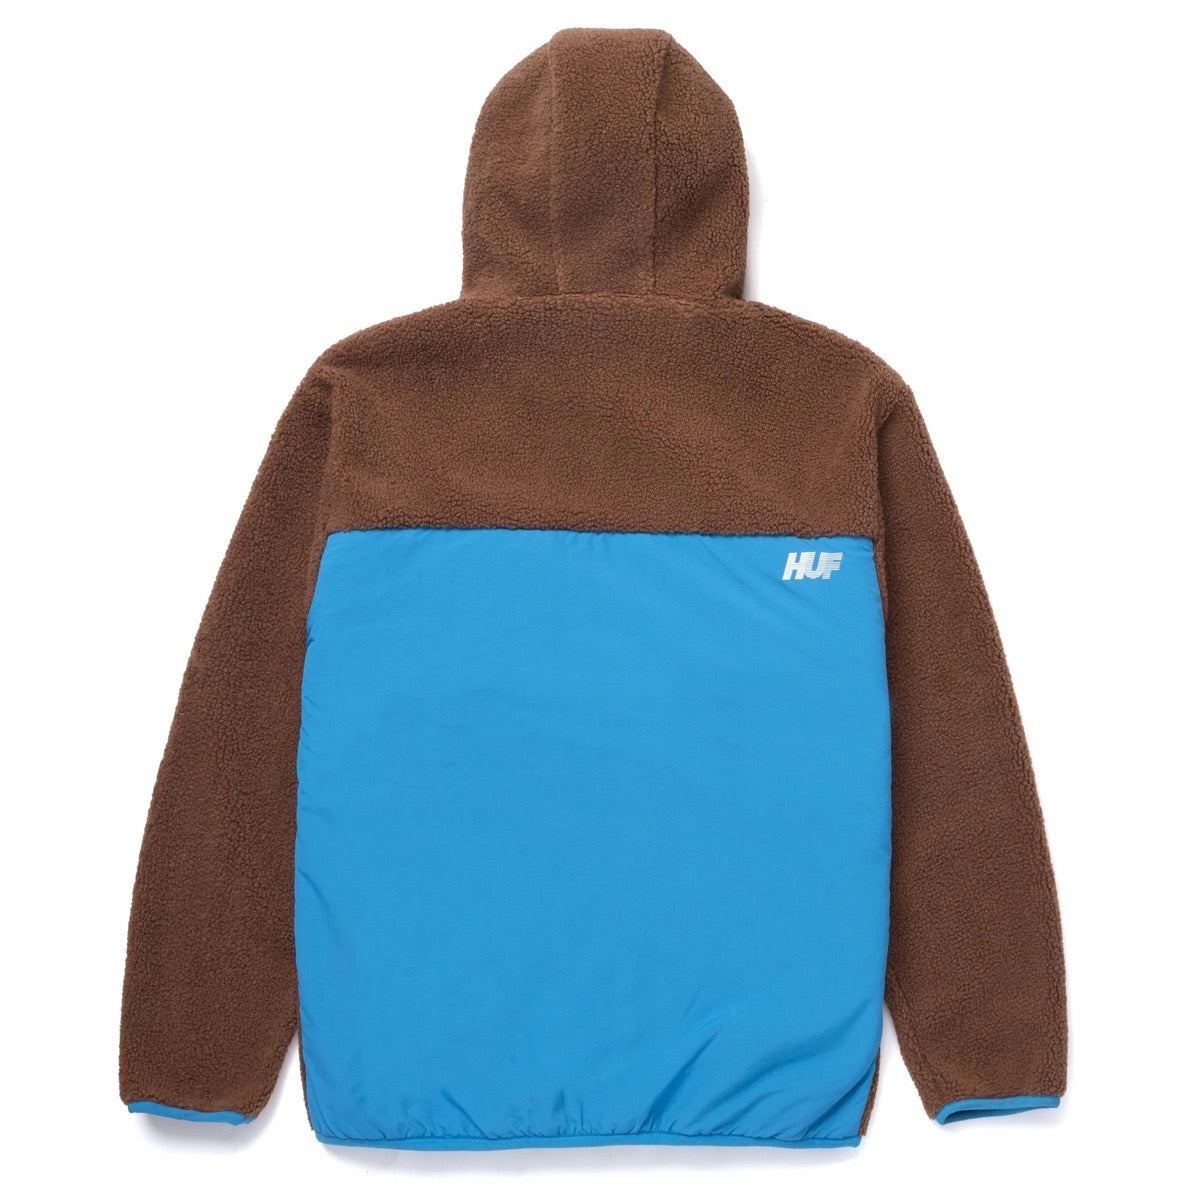 FORT POINT SHERPA JACKET DUST BROWN